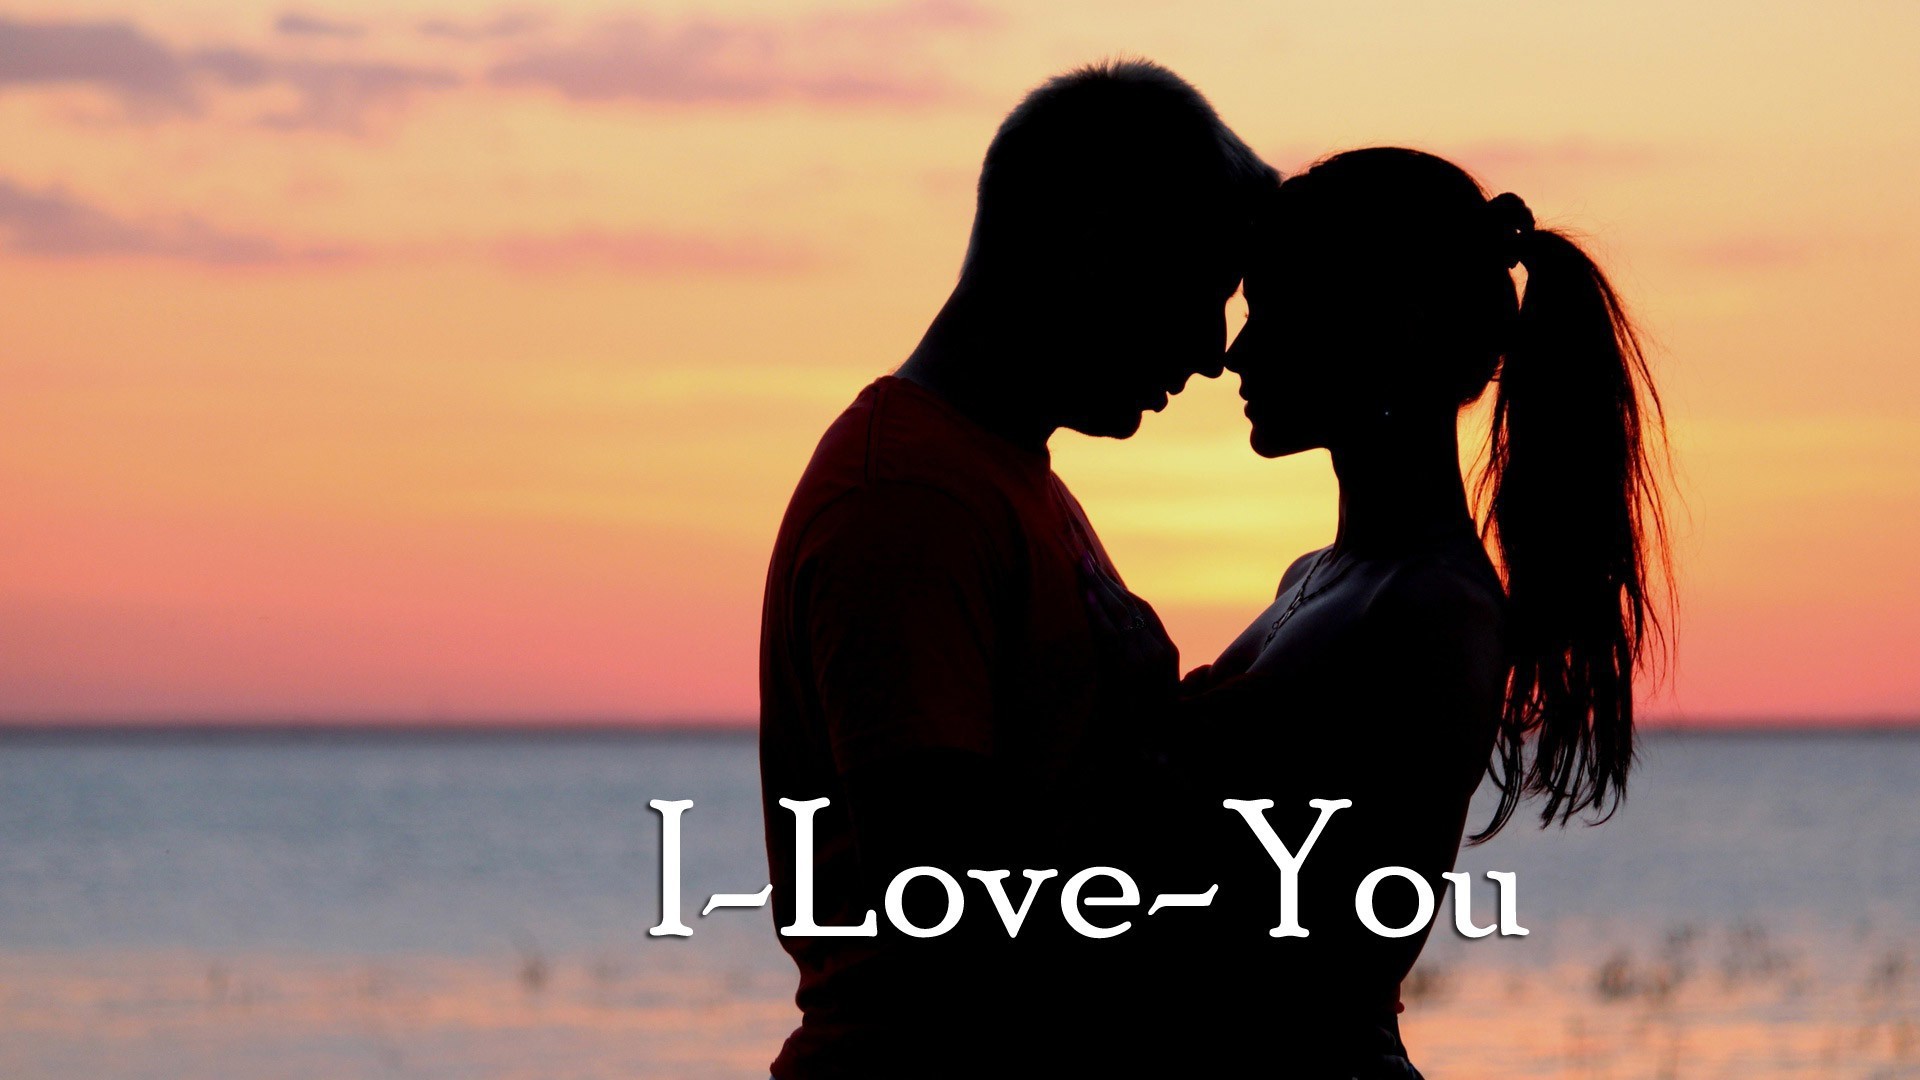 I Love You With Couple Wallpapers Data-src /w/full/3/2/4/93453 - Love You  Kiss Images Hd - 1920x1080 Wallpaper 